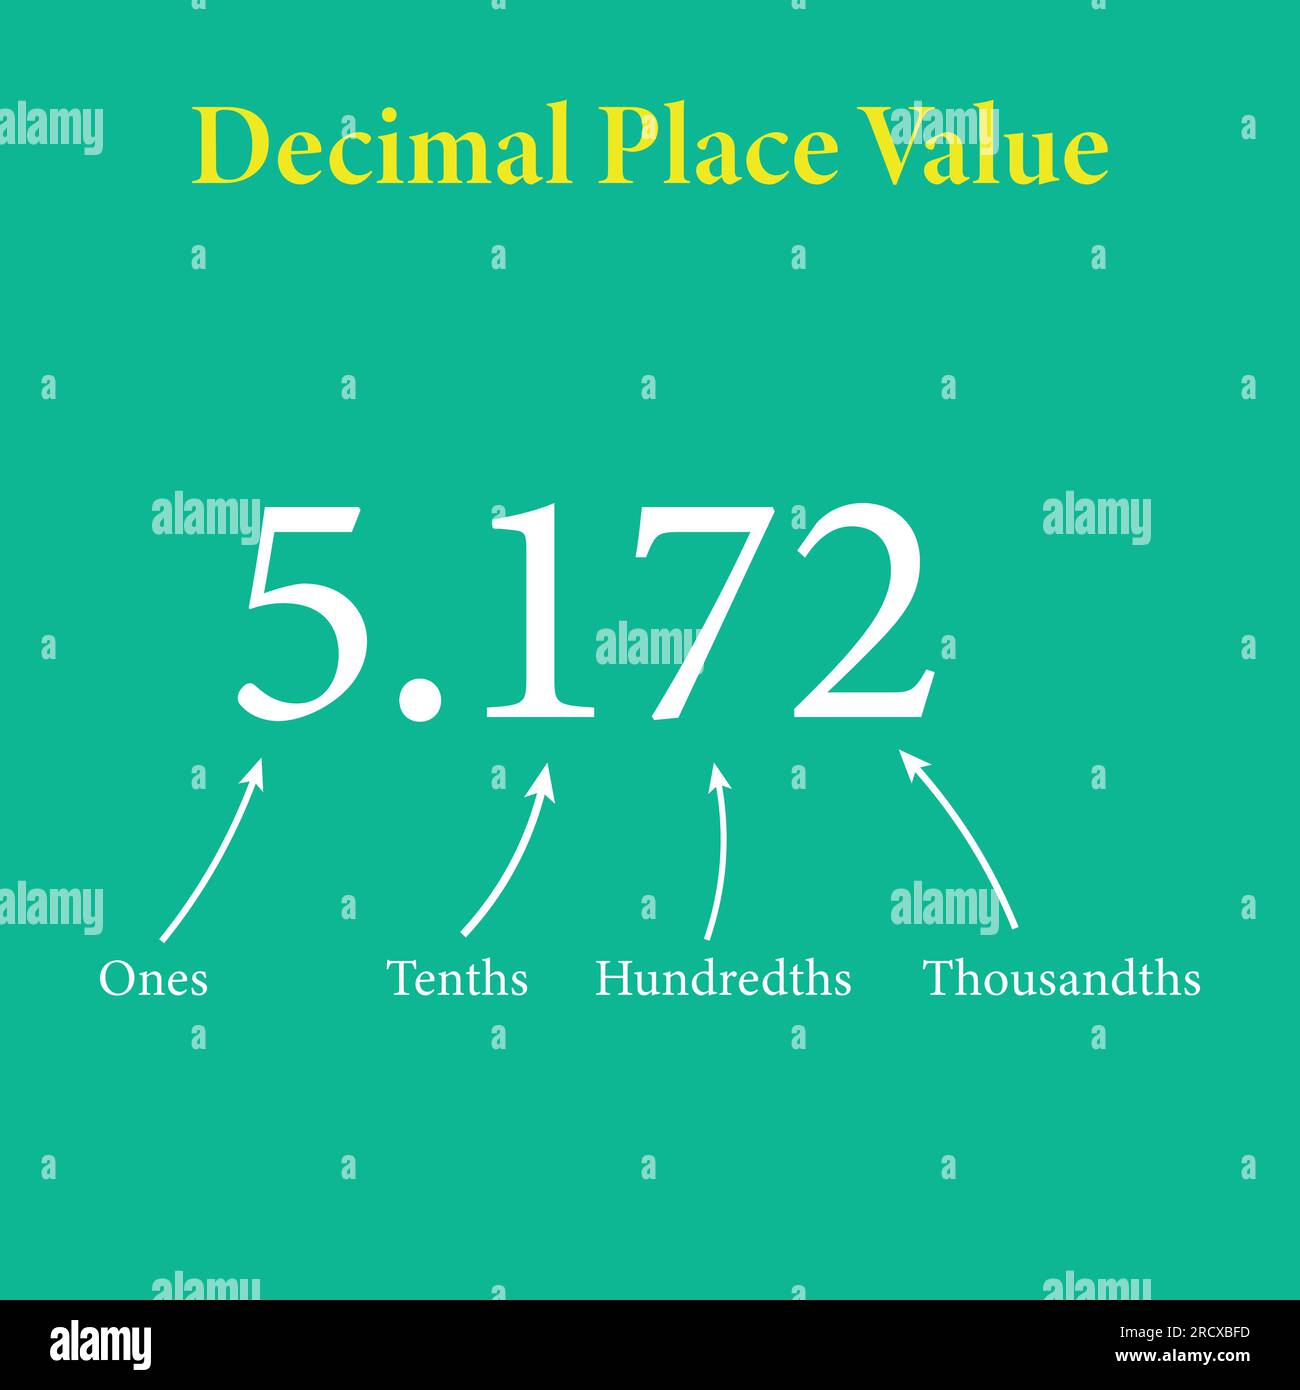 Decimal place value chart in mathematics. Ones, tenths, hundredths and thousandths. Vector illustration isolated on chalkboard. Stock Vector